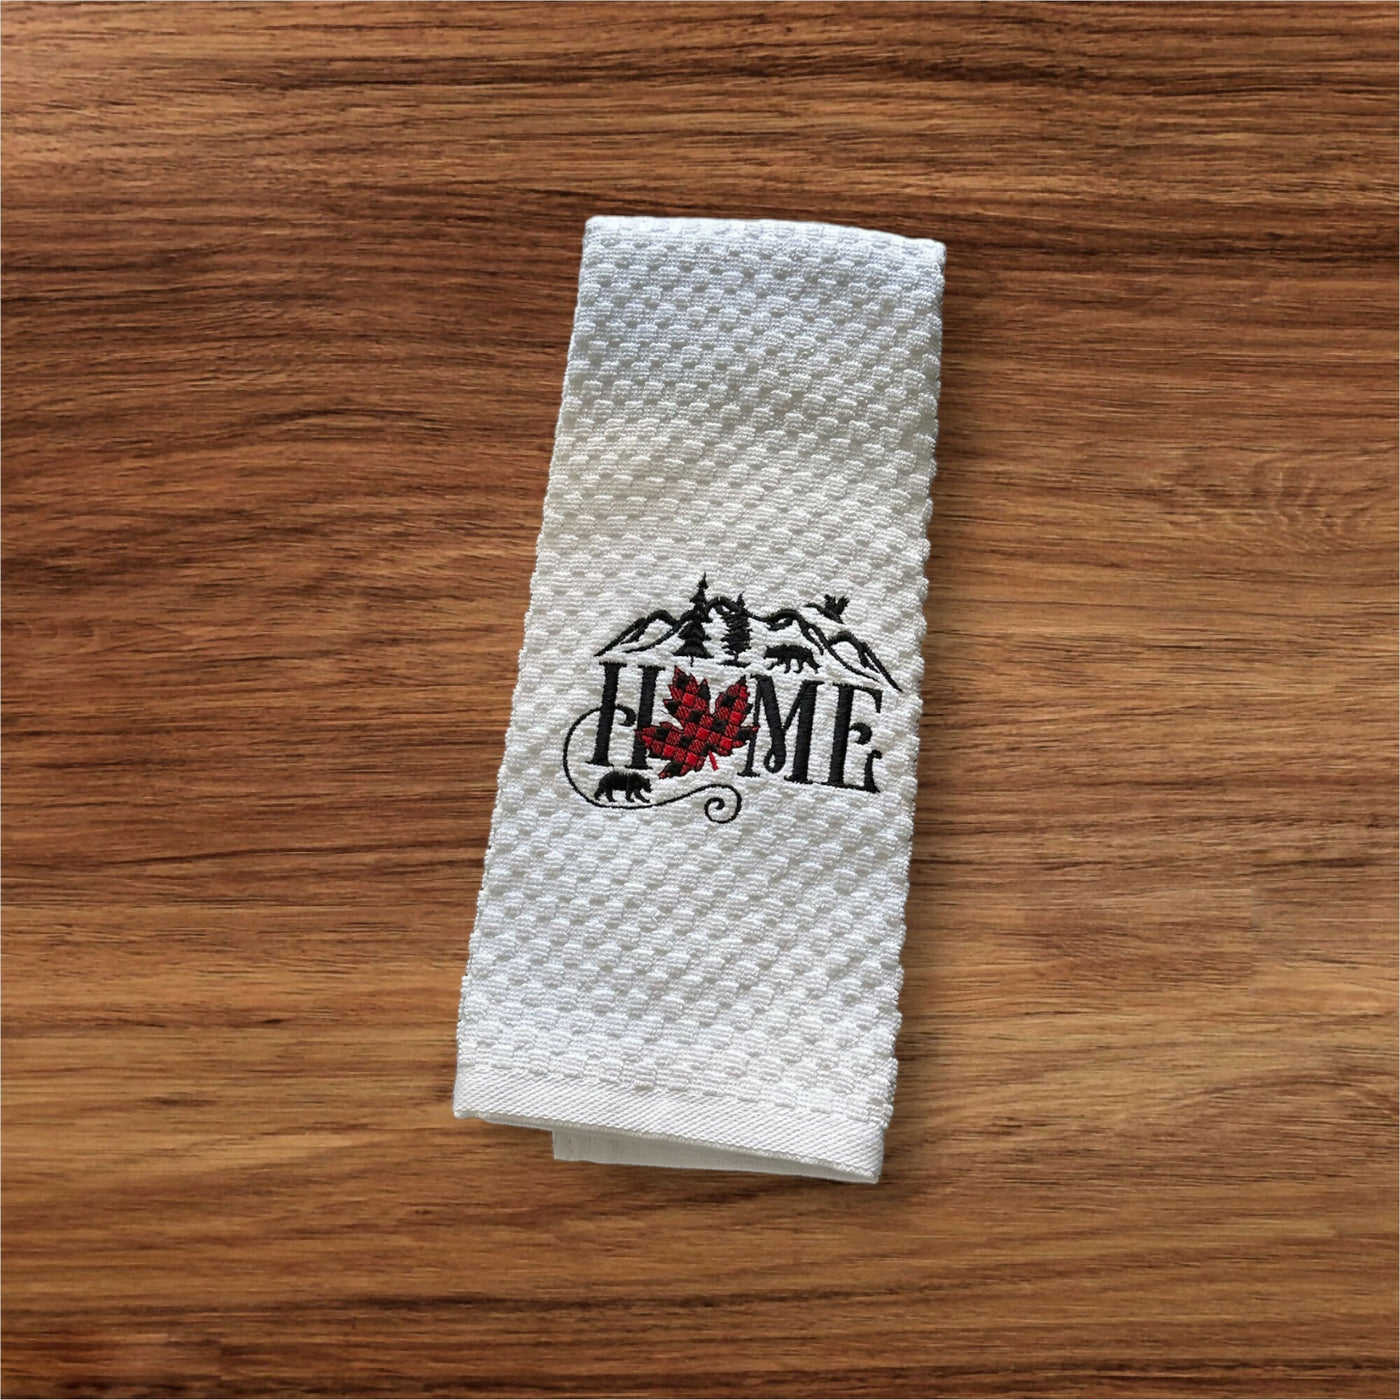 Home Embroidered Kitchen Towel